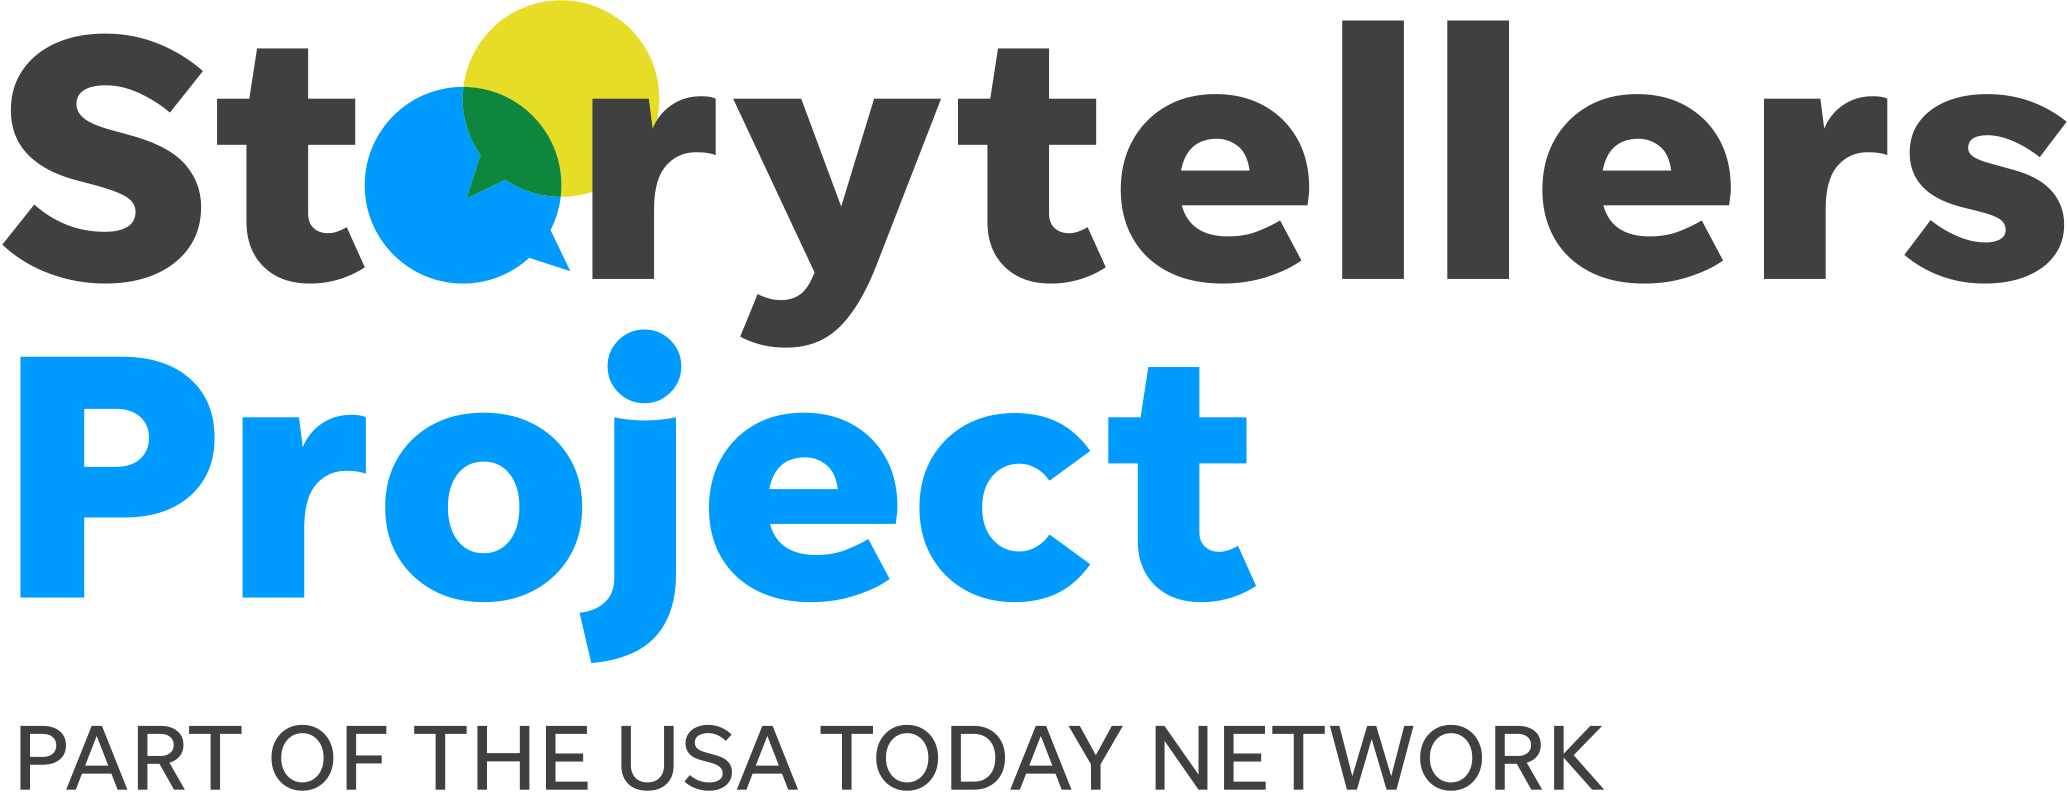 Storytellers Project | part of the USA TODAY NETWORK